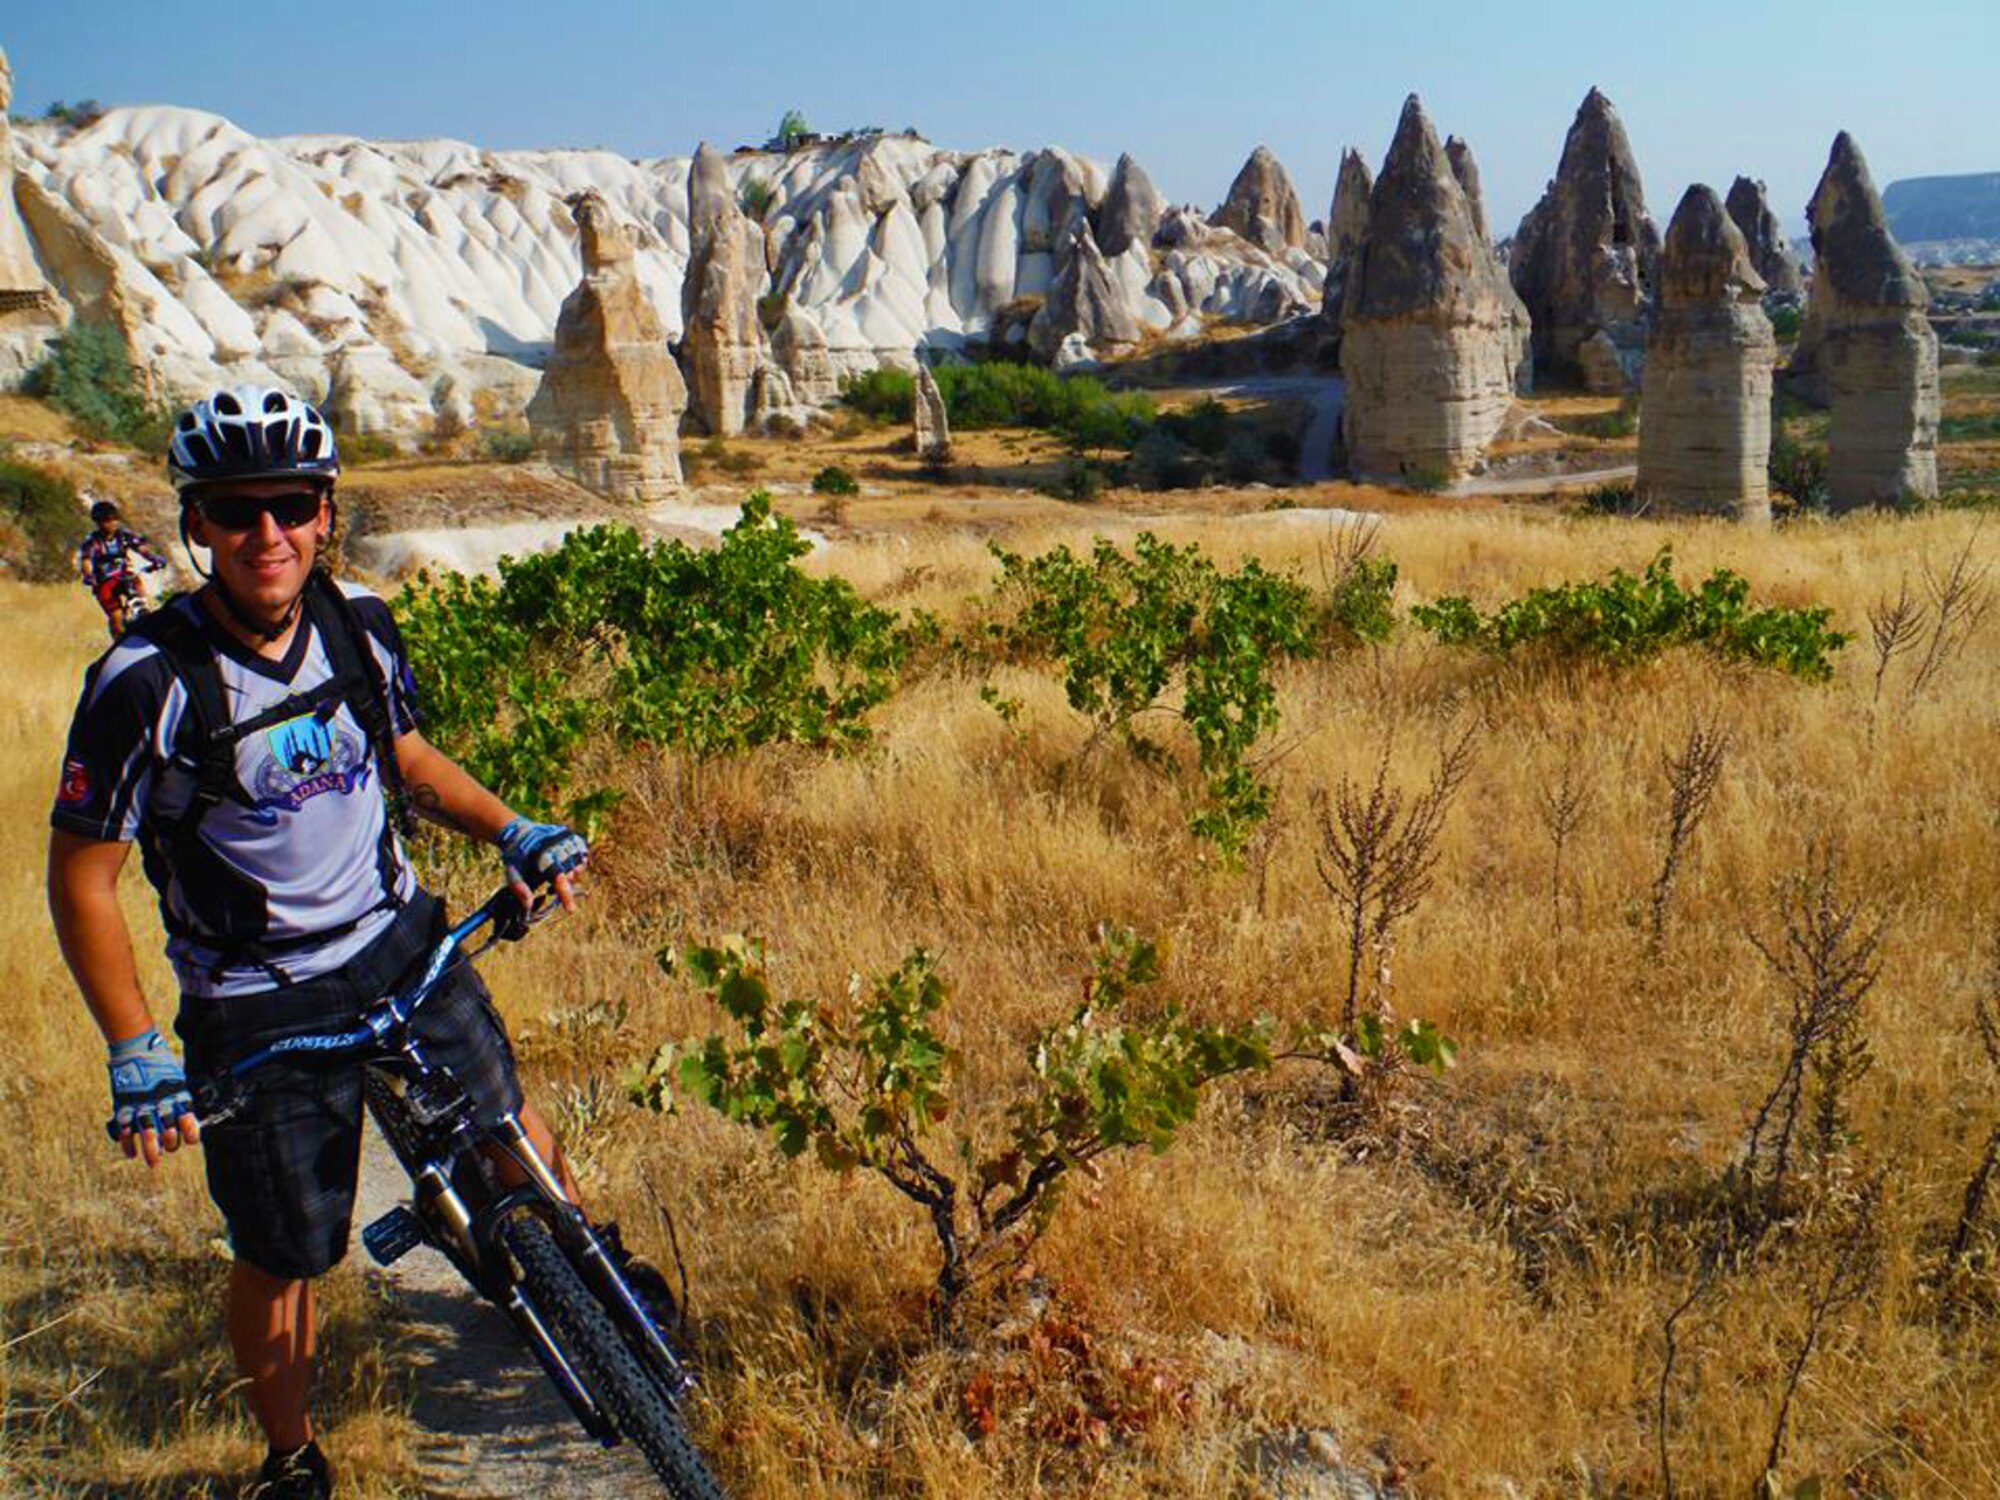 Master Sgt. Chris Rekrut, 728th Air Mobility Squadron Quality Assurance superintendent, pauses during a mountain bike ride near Goreme, Turkey, also known as the region of Cappadocia, in the summer of 2013. Rekrut, who was recently promoted by means of the Stripes for Exceptional Performers program, was actively involved with the Turkey chapter of the Beer Belly Bike Club and played a large role in planning trips such as this one for the group. (Courtesy photo)